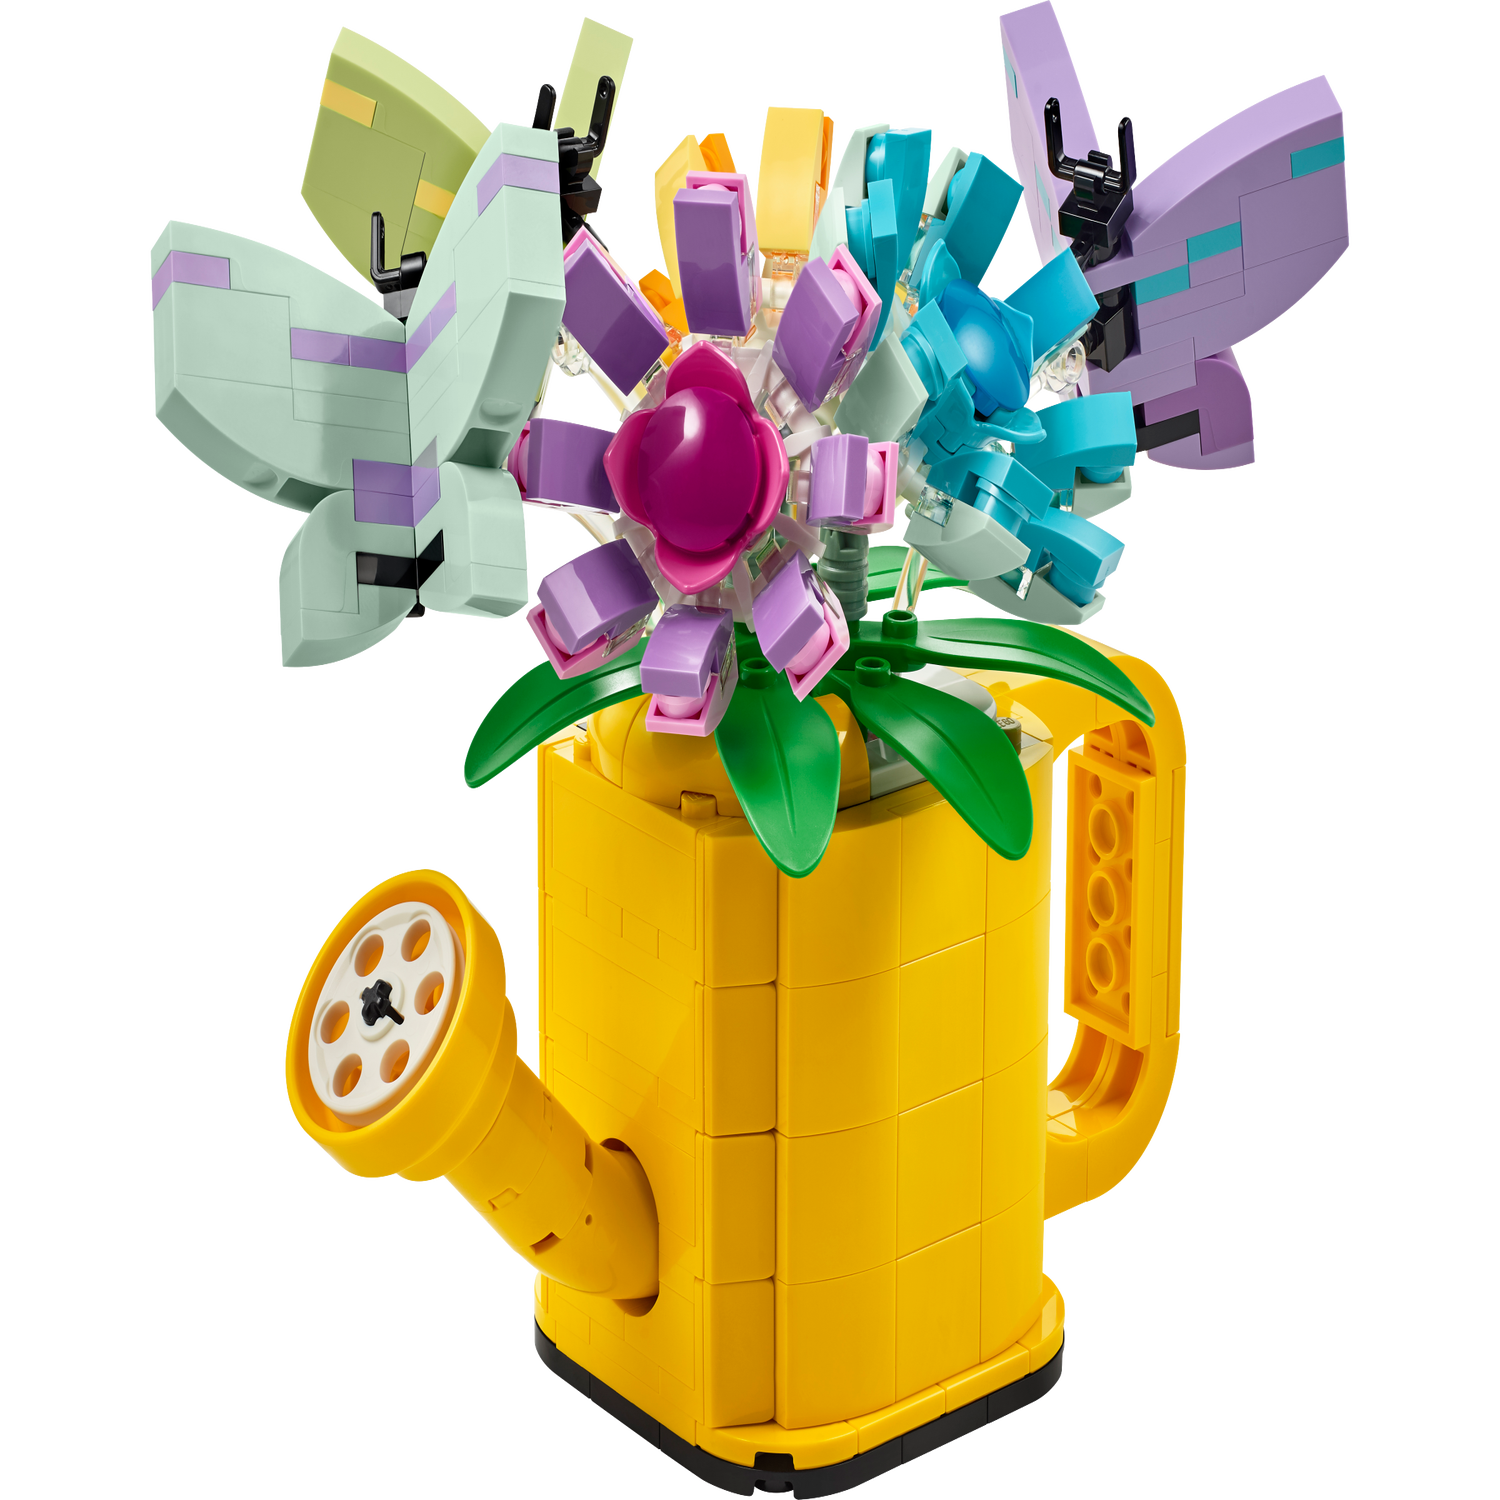 Plants from Plants 40320 | Other | Buy online at the Official LEGO® Shop US